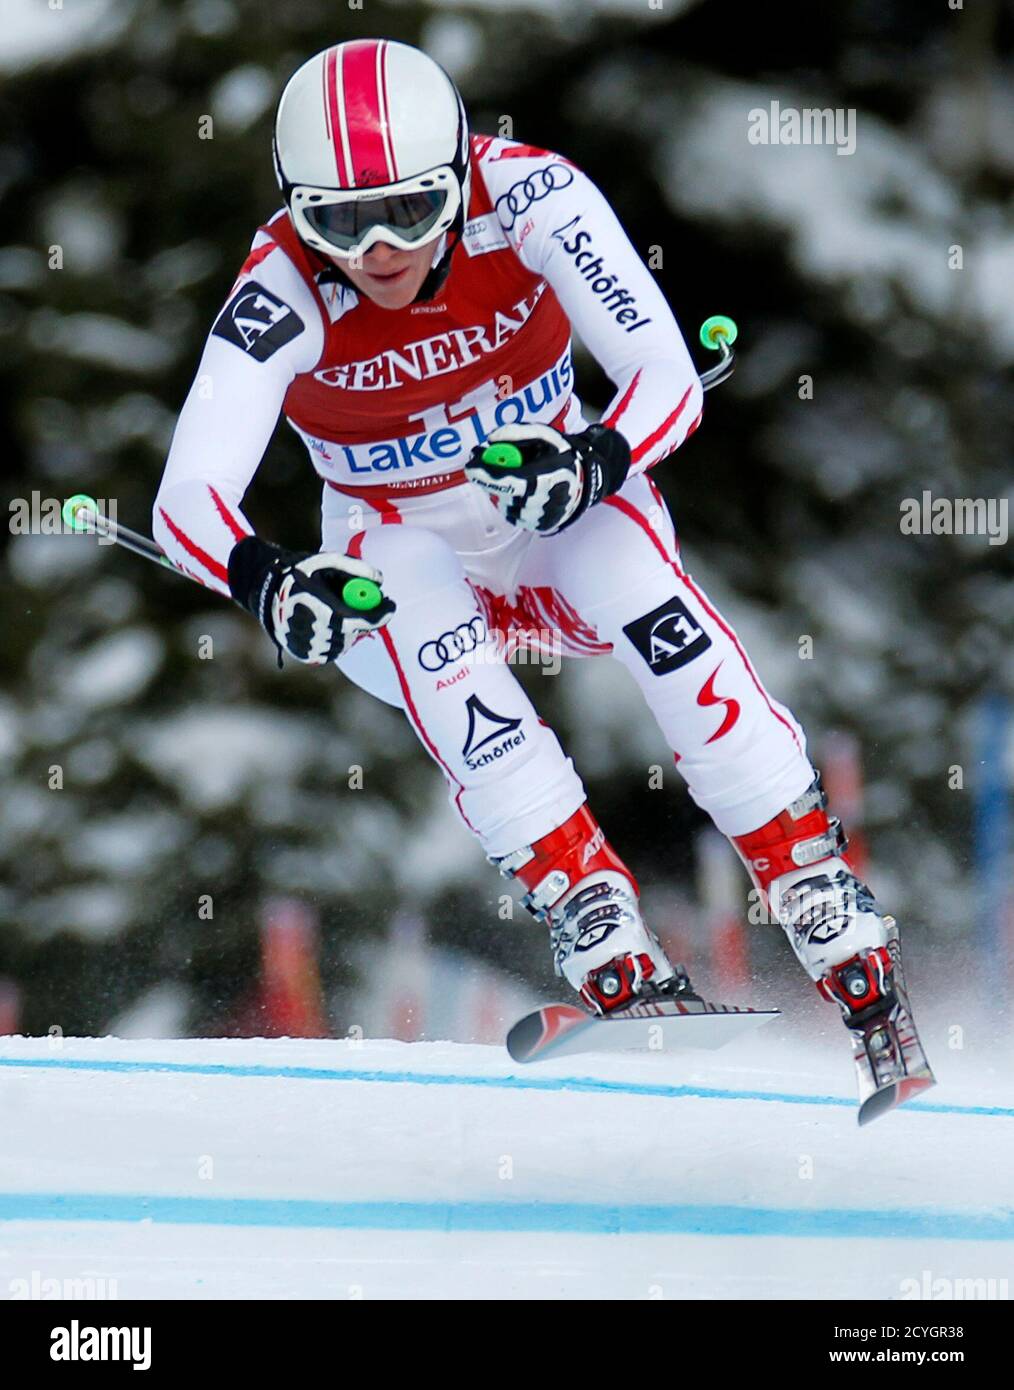 Andrea Fischbacher of Austria makes a turn during alpine skiing training at the Women's World Cup Downhill in Lake Louise, Alberta December 2, 2010.  REUTERS/Mike Blake    (CANADA - Tags: SPORT SKIING) Stock Photo